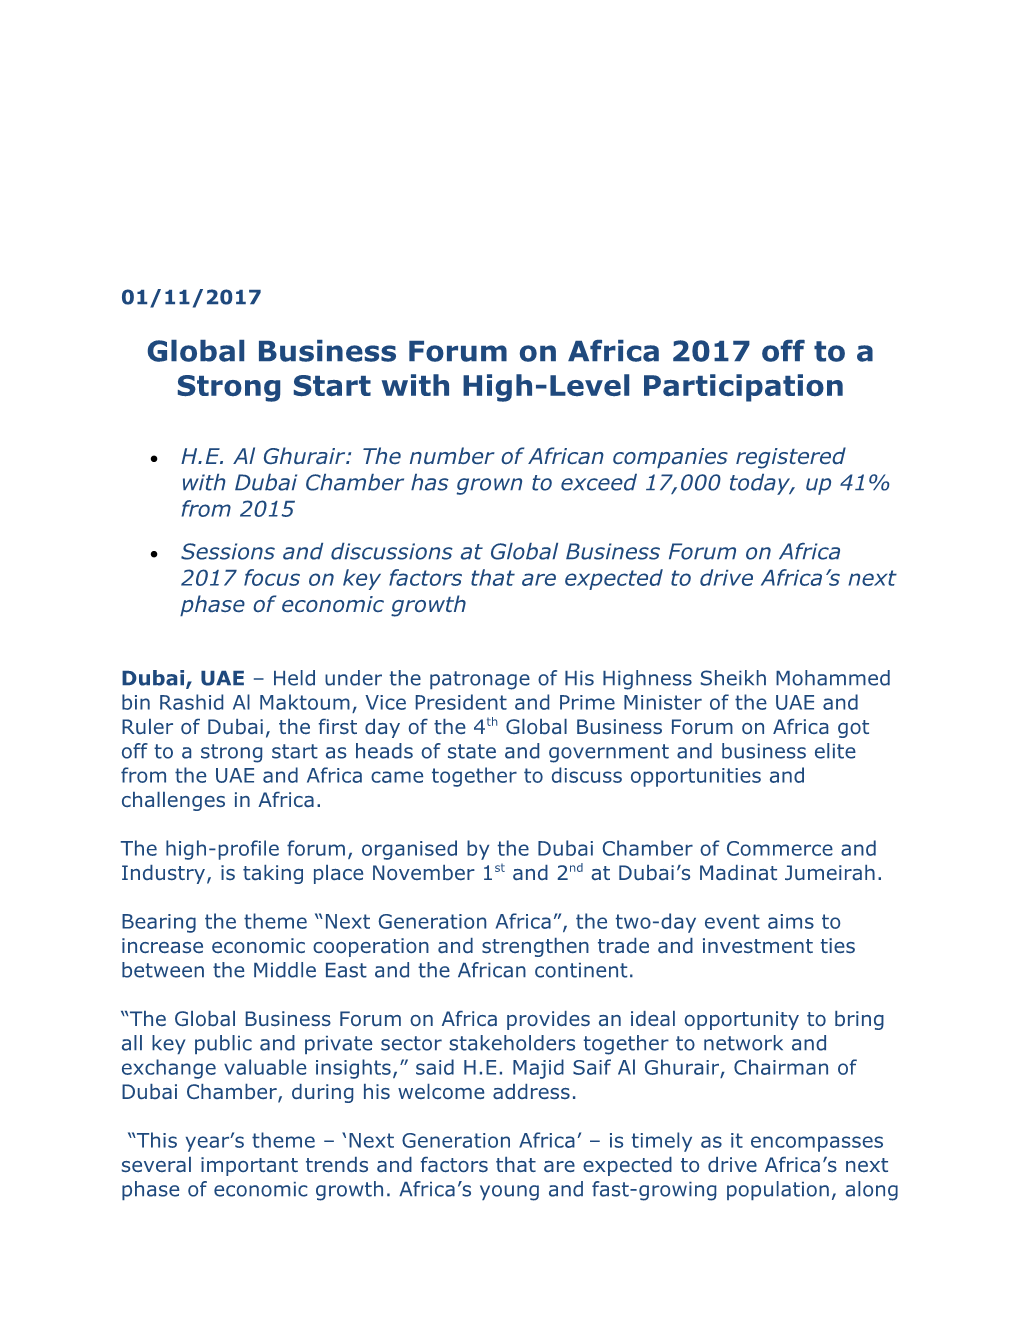 Global Business Forum on Africa 2017 Off to Astrongstart with High-Level Participation